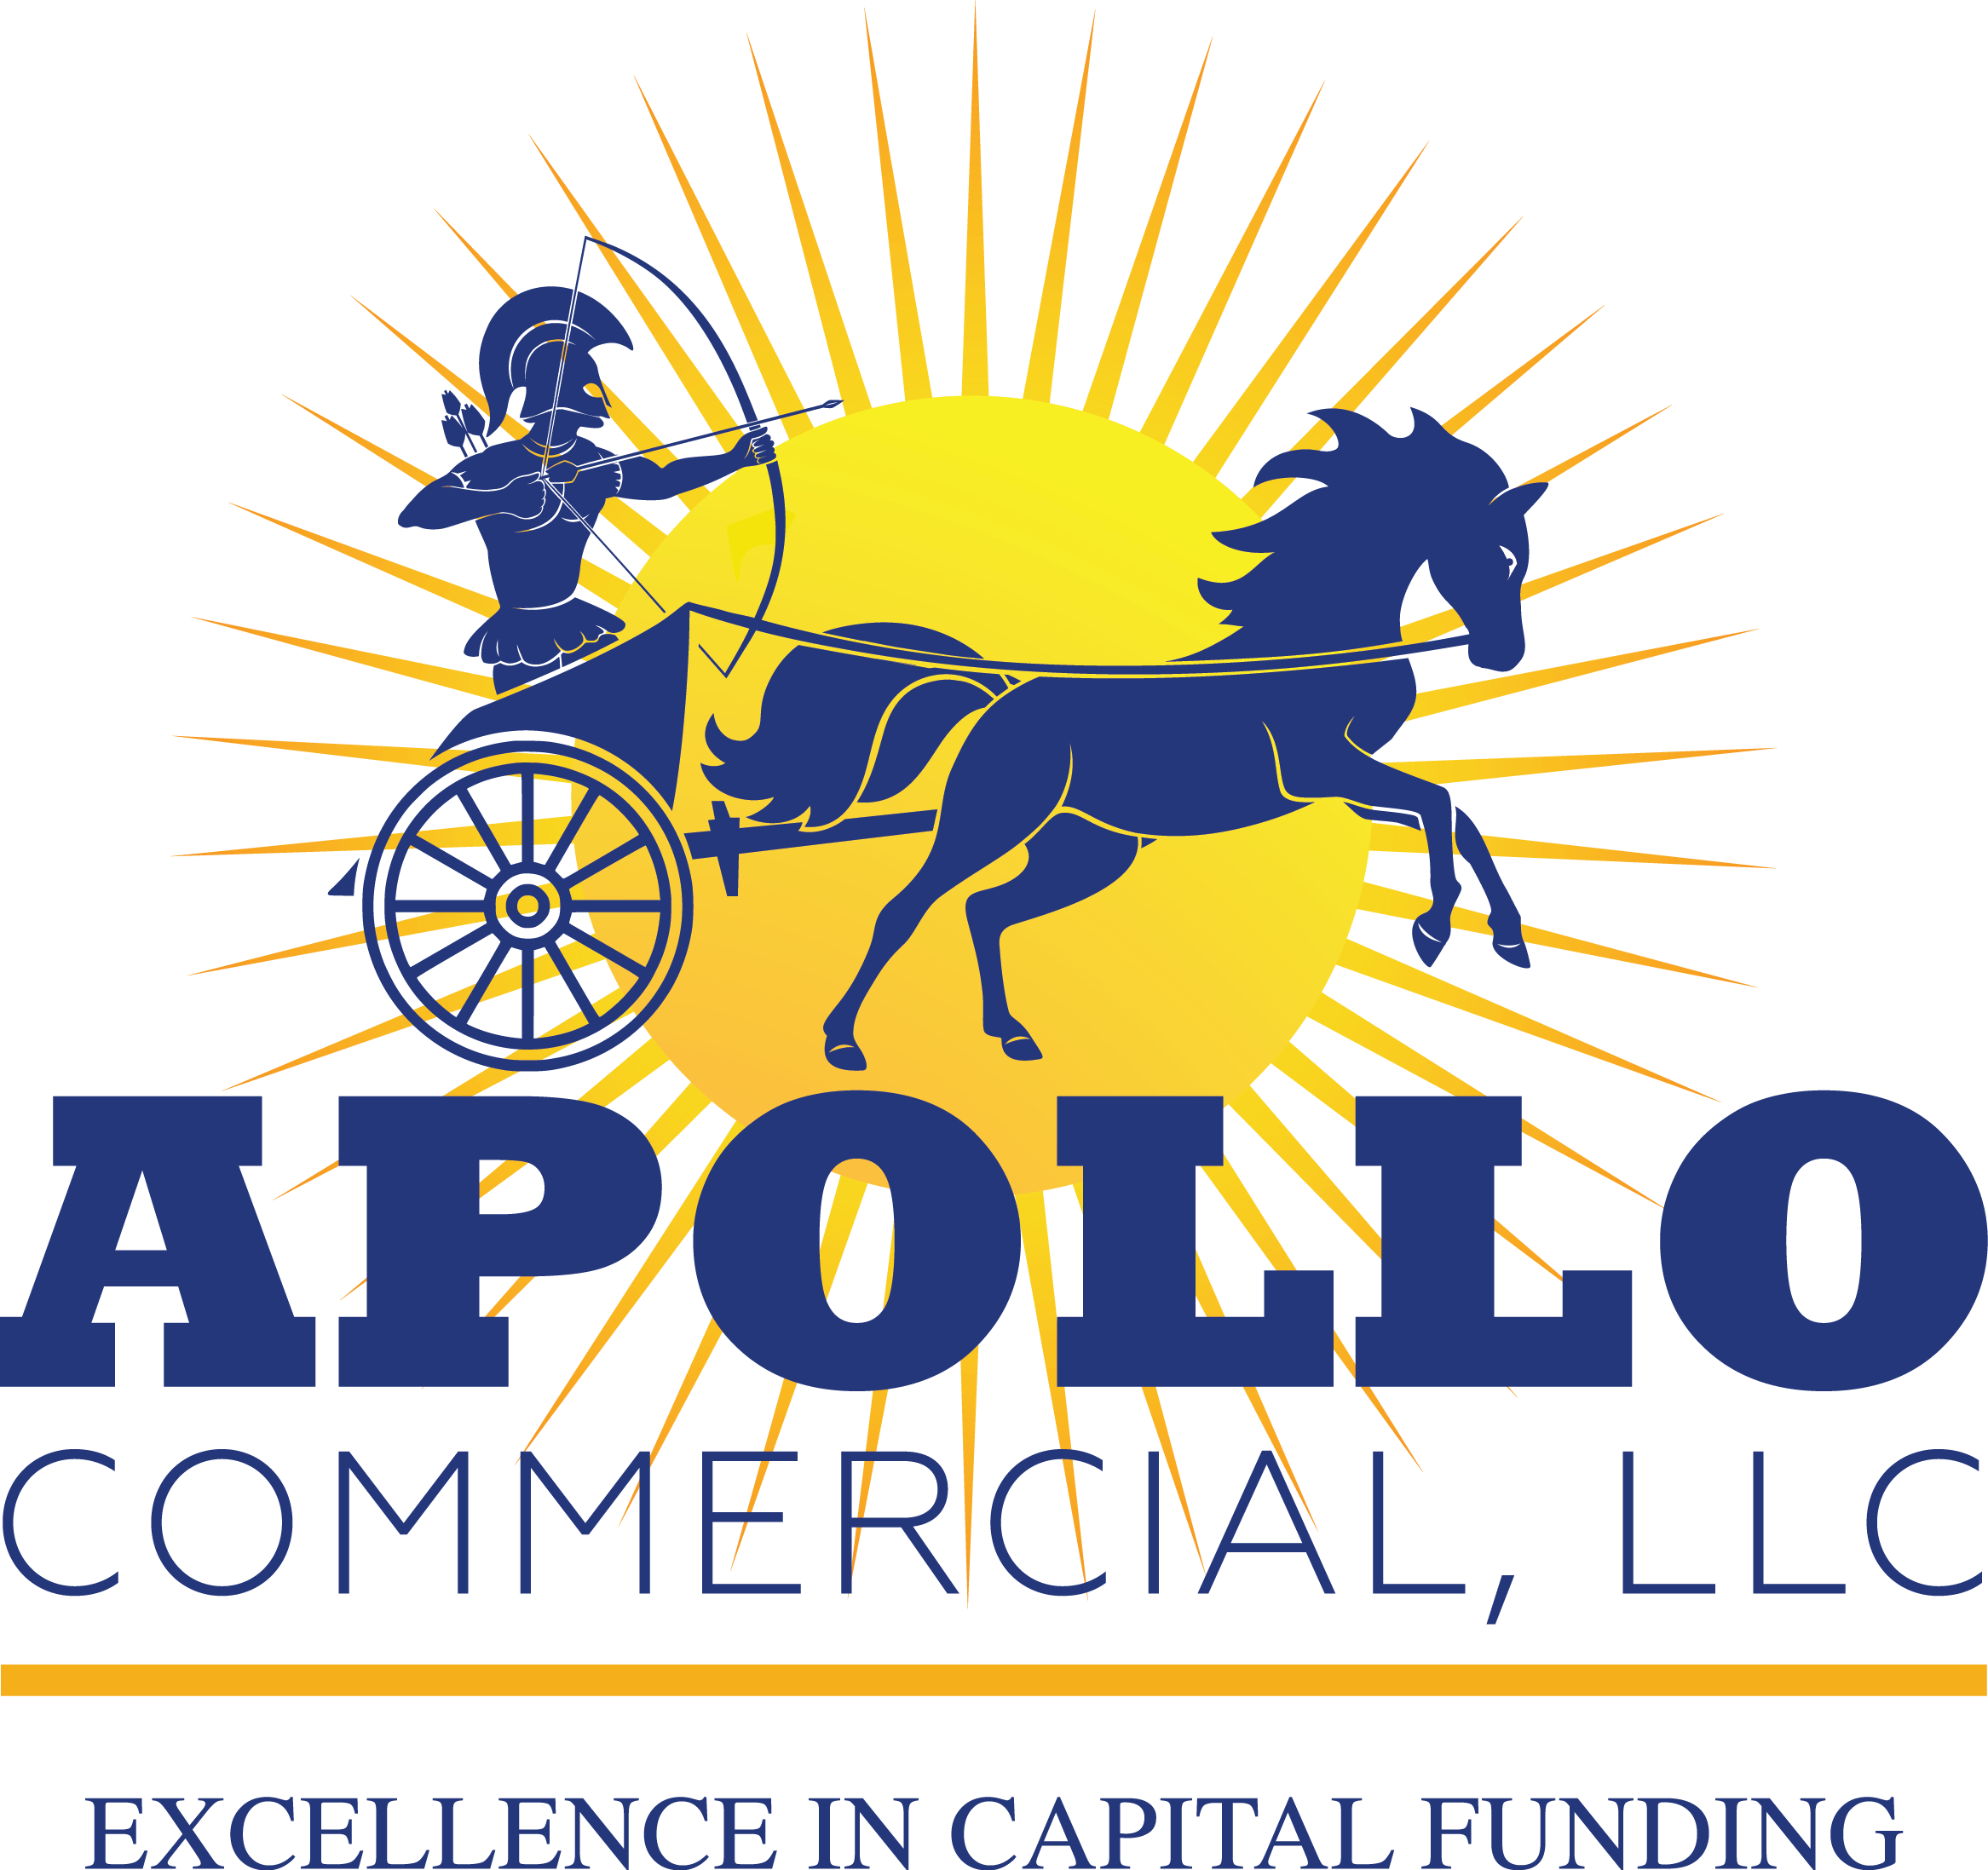 What is the symbol of apollo commercial real estate finance